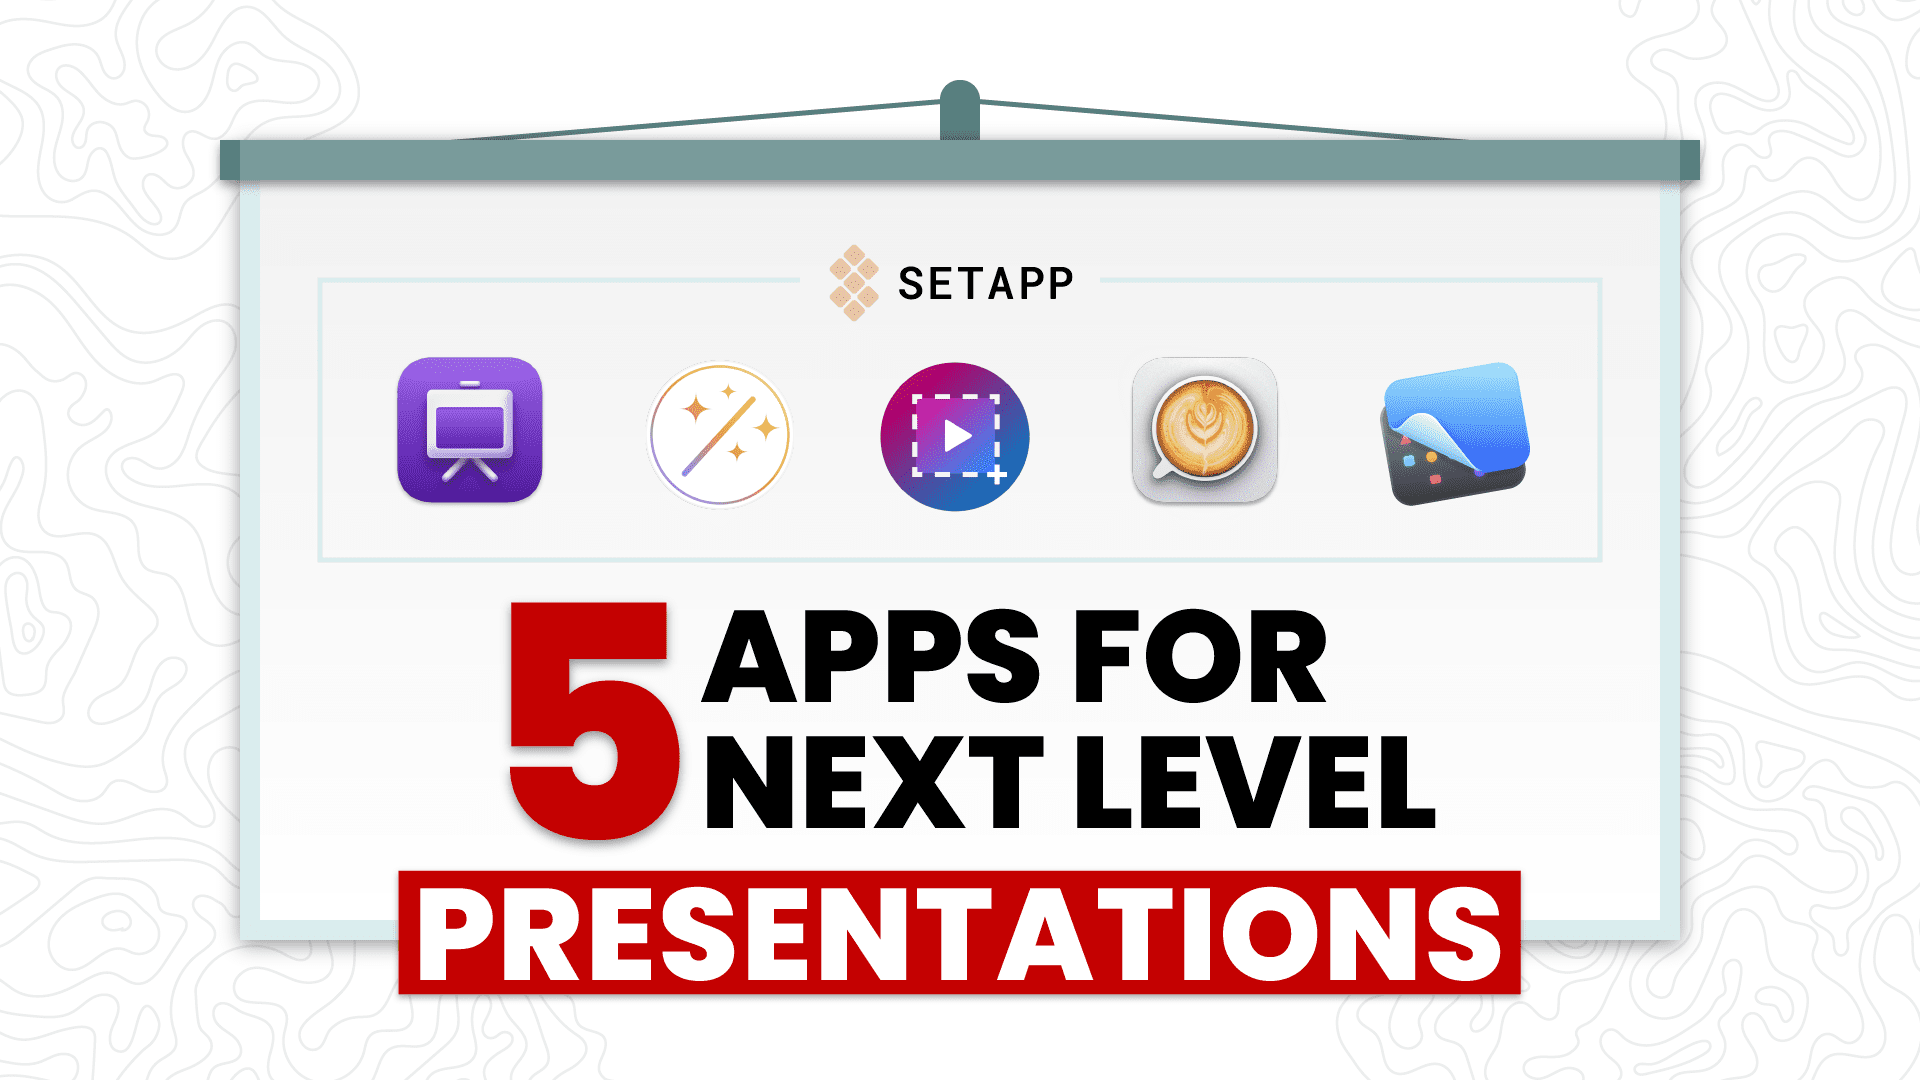 Illustration with icons of presentation apps in Setapp